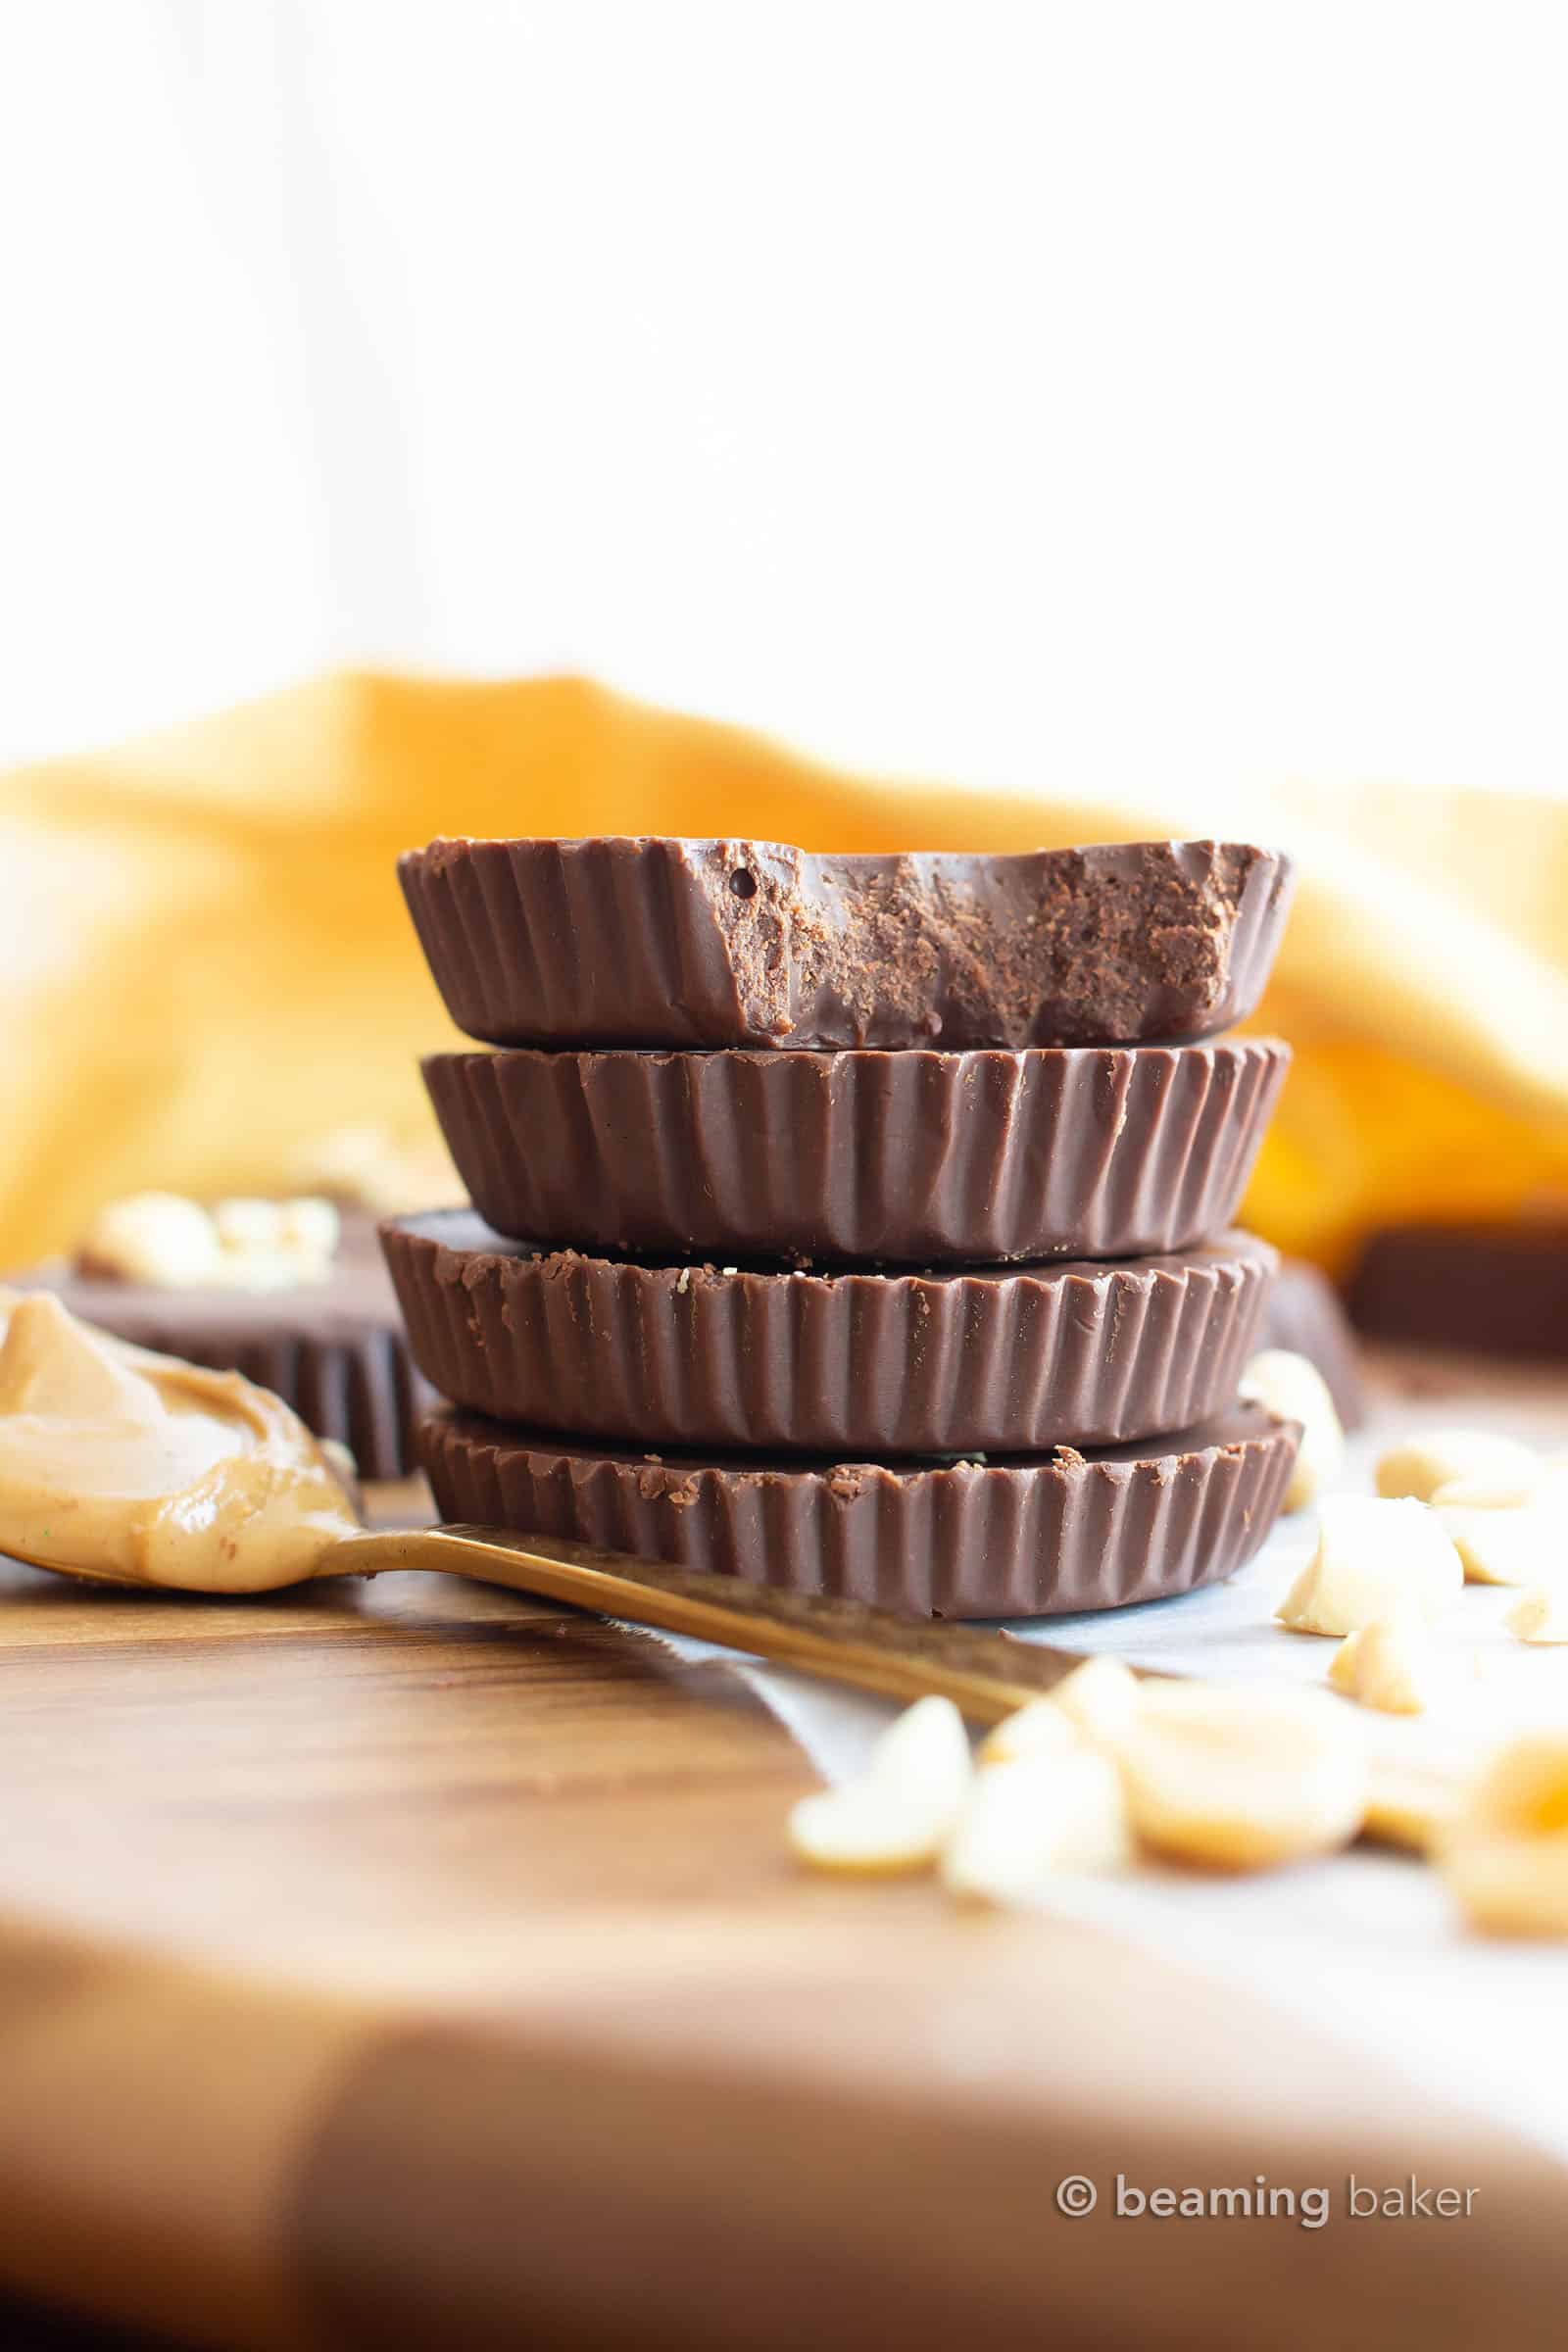 Keto Chocolate Peanut Butter Fudge Cups: this 5 Minute chocolate peanut butter fudge recipe is so easy! Just 2 ingredients for yummy cups of creamy, rich Low Carb fudge! #Keto #LowCarb #Vegan #Fudge #PeanutButter | Recipe at BeamingBaker.com